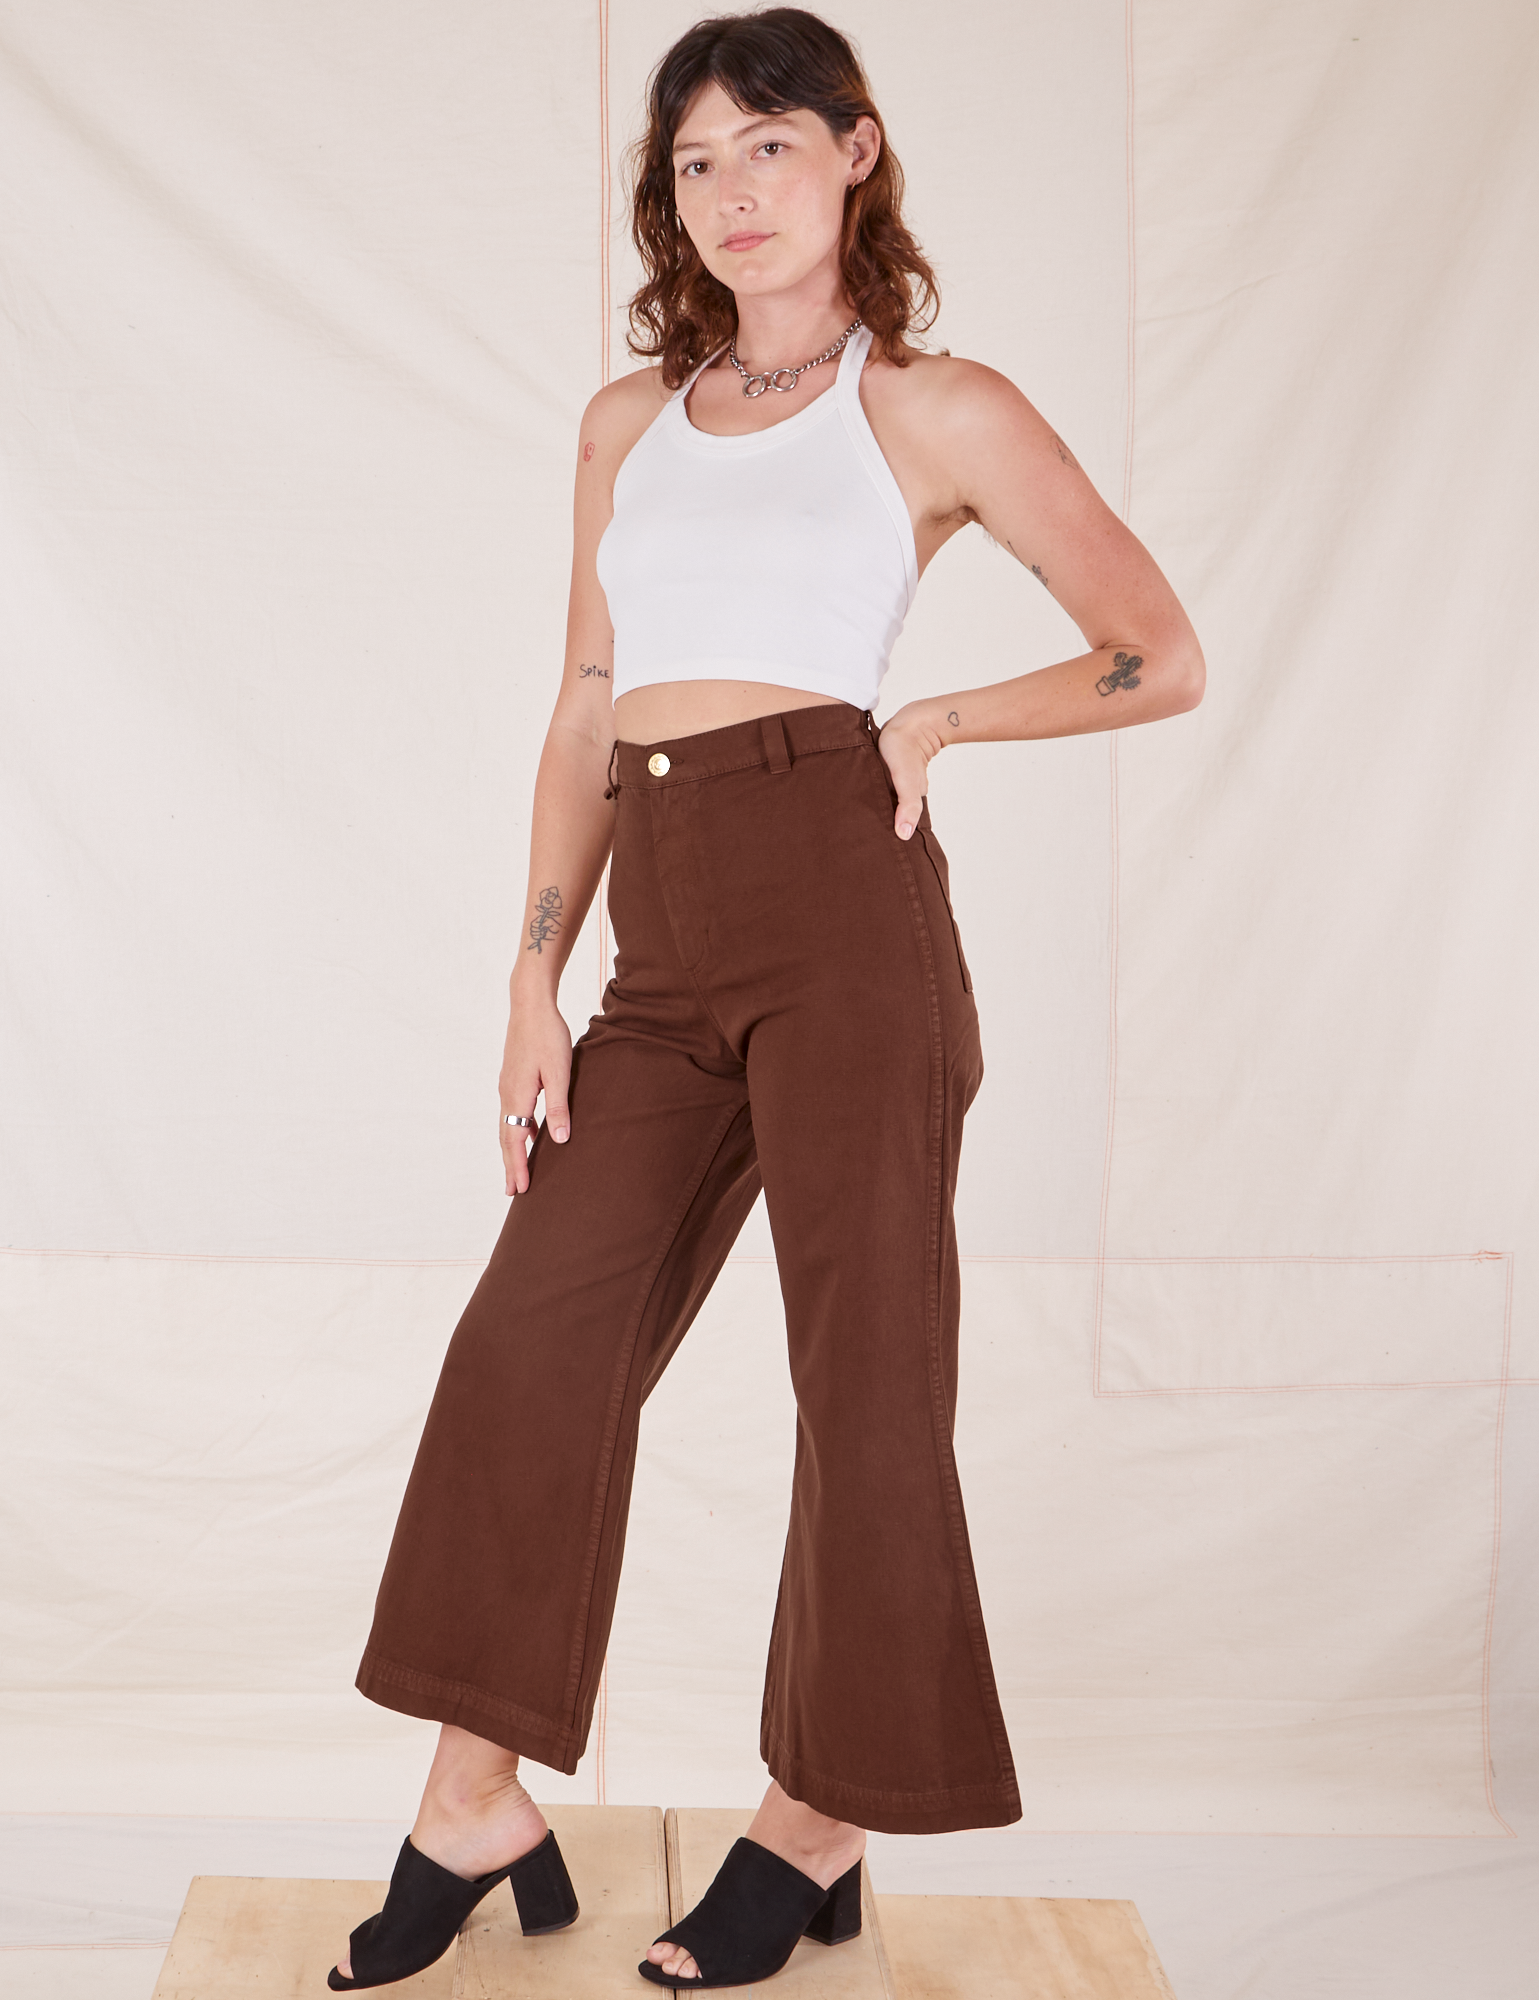 Angled view of Bell Bottoms in Fudgesicle Brown and vintage off-white Halter Top on Alex